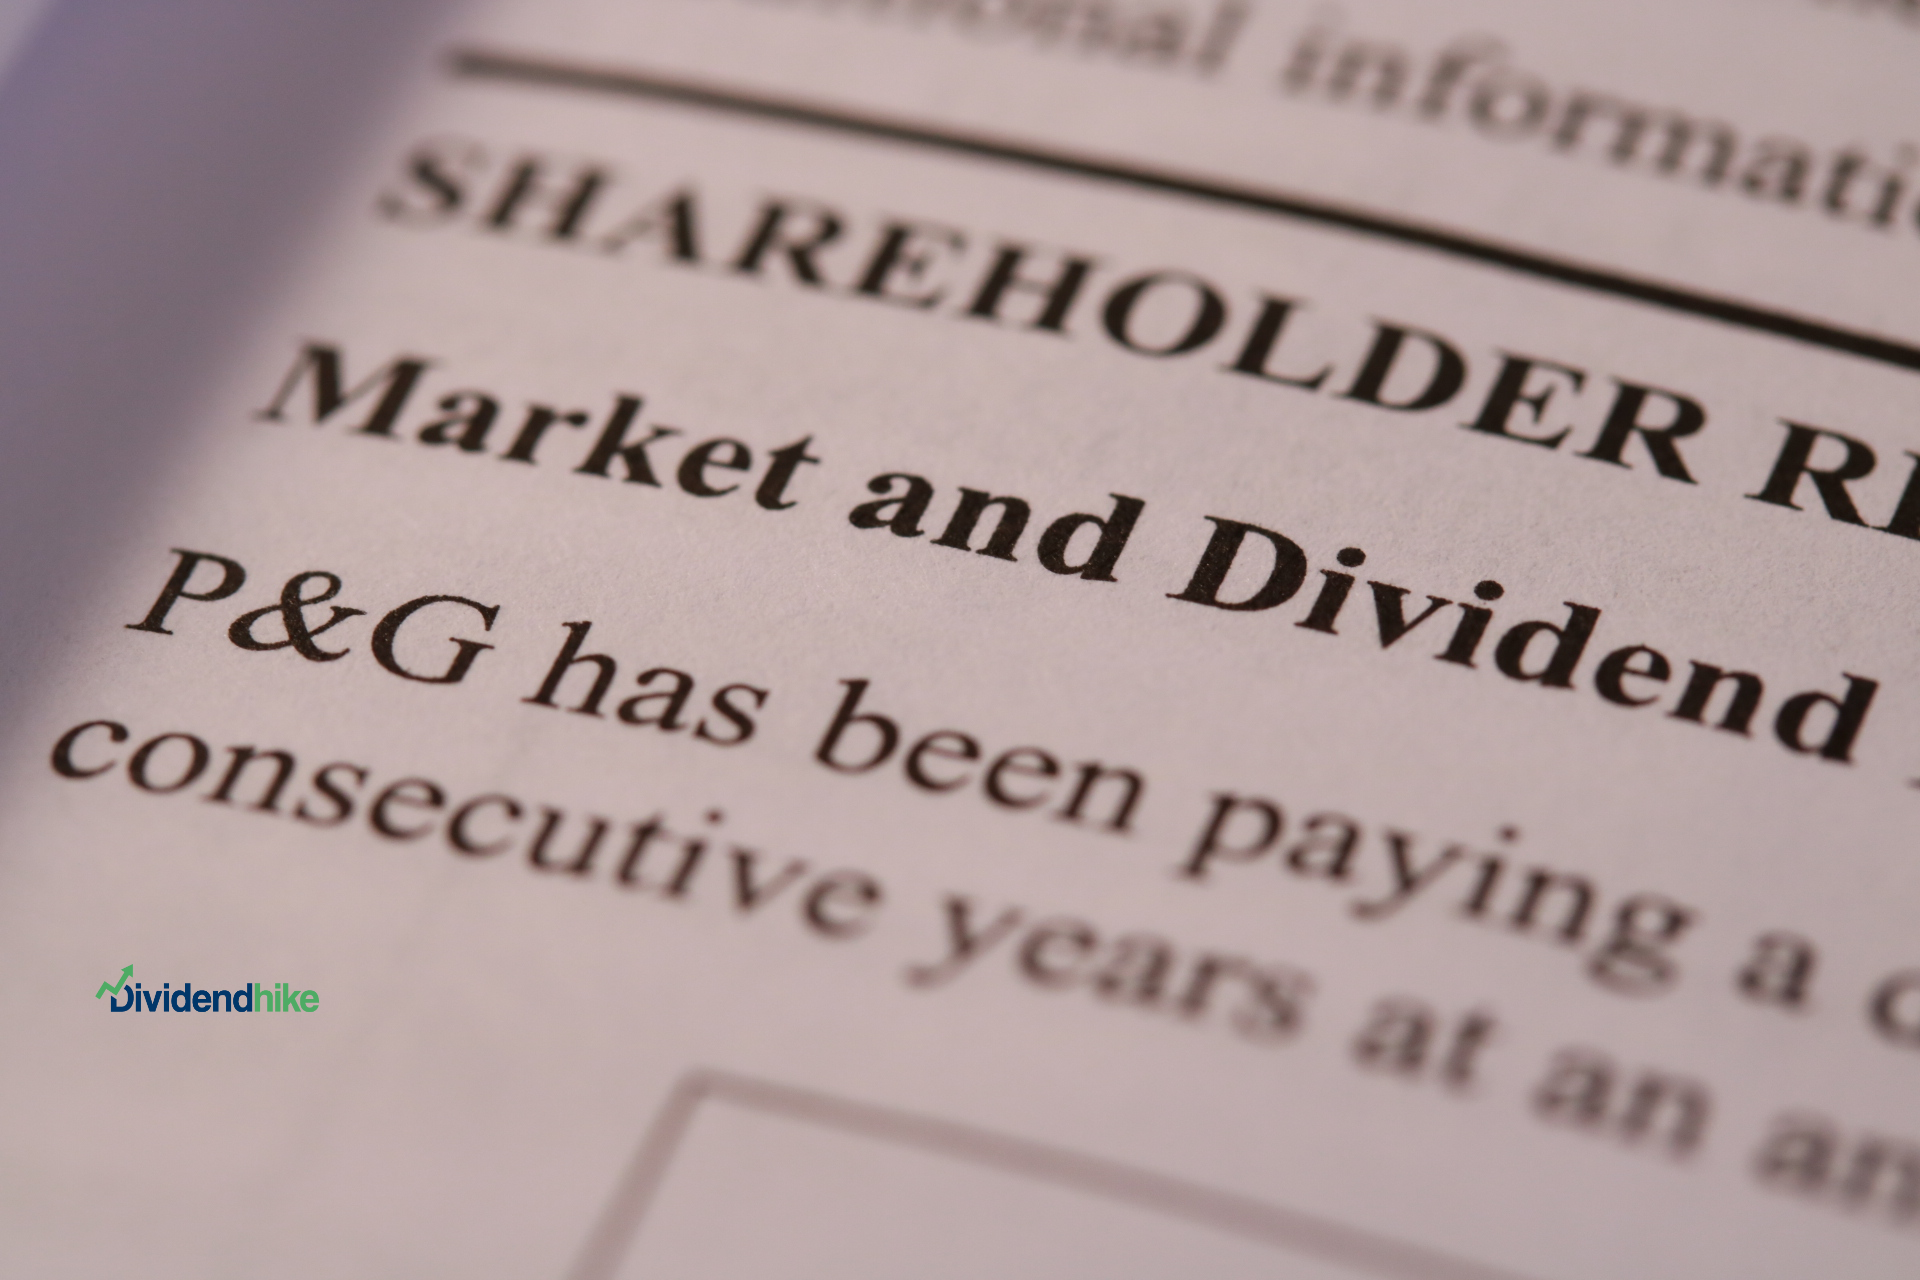 Dividend Aristocrat P&G has paid a dividend every year since its incorporation in 1890 © dividendhike.com